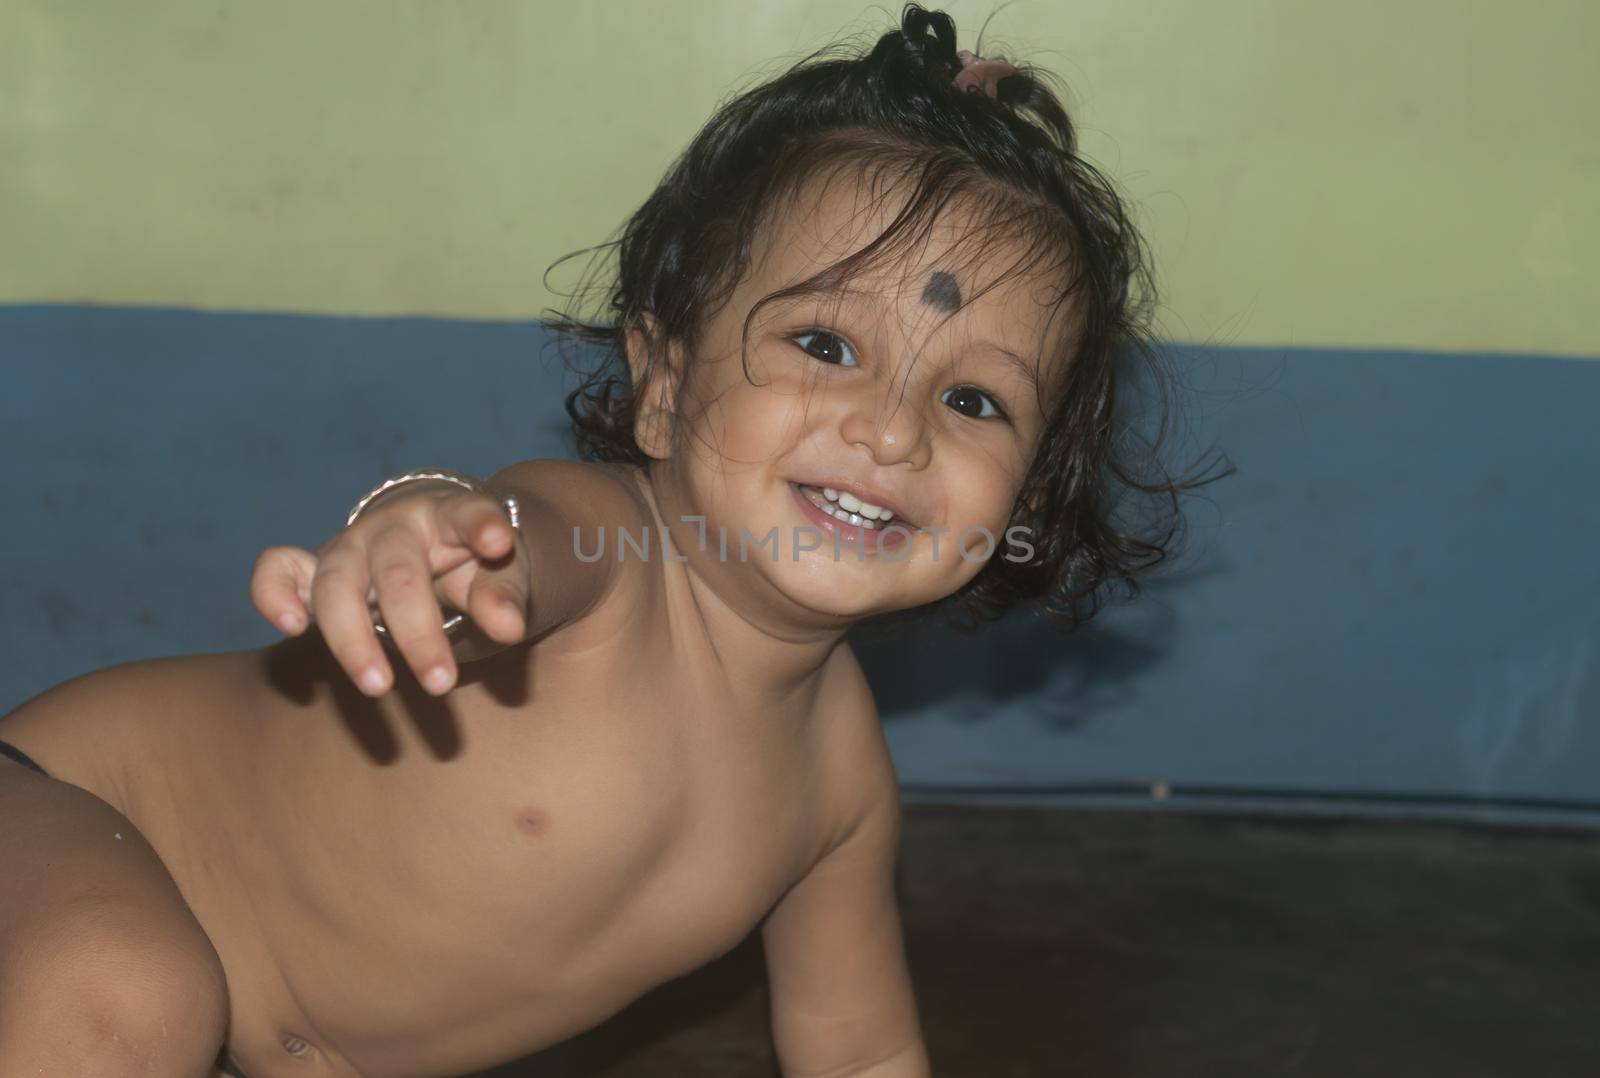 Cute happy indian baby without shirt crawling smiling and looking at camera.